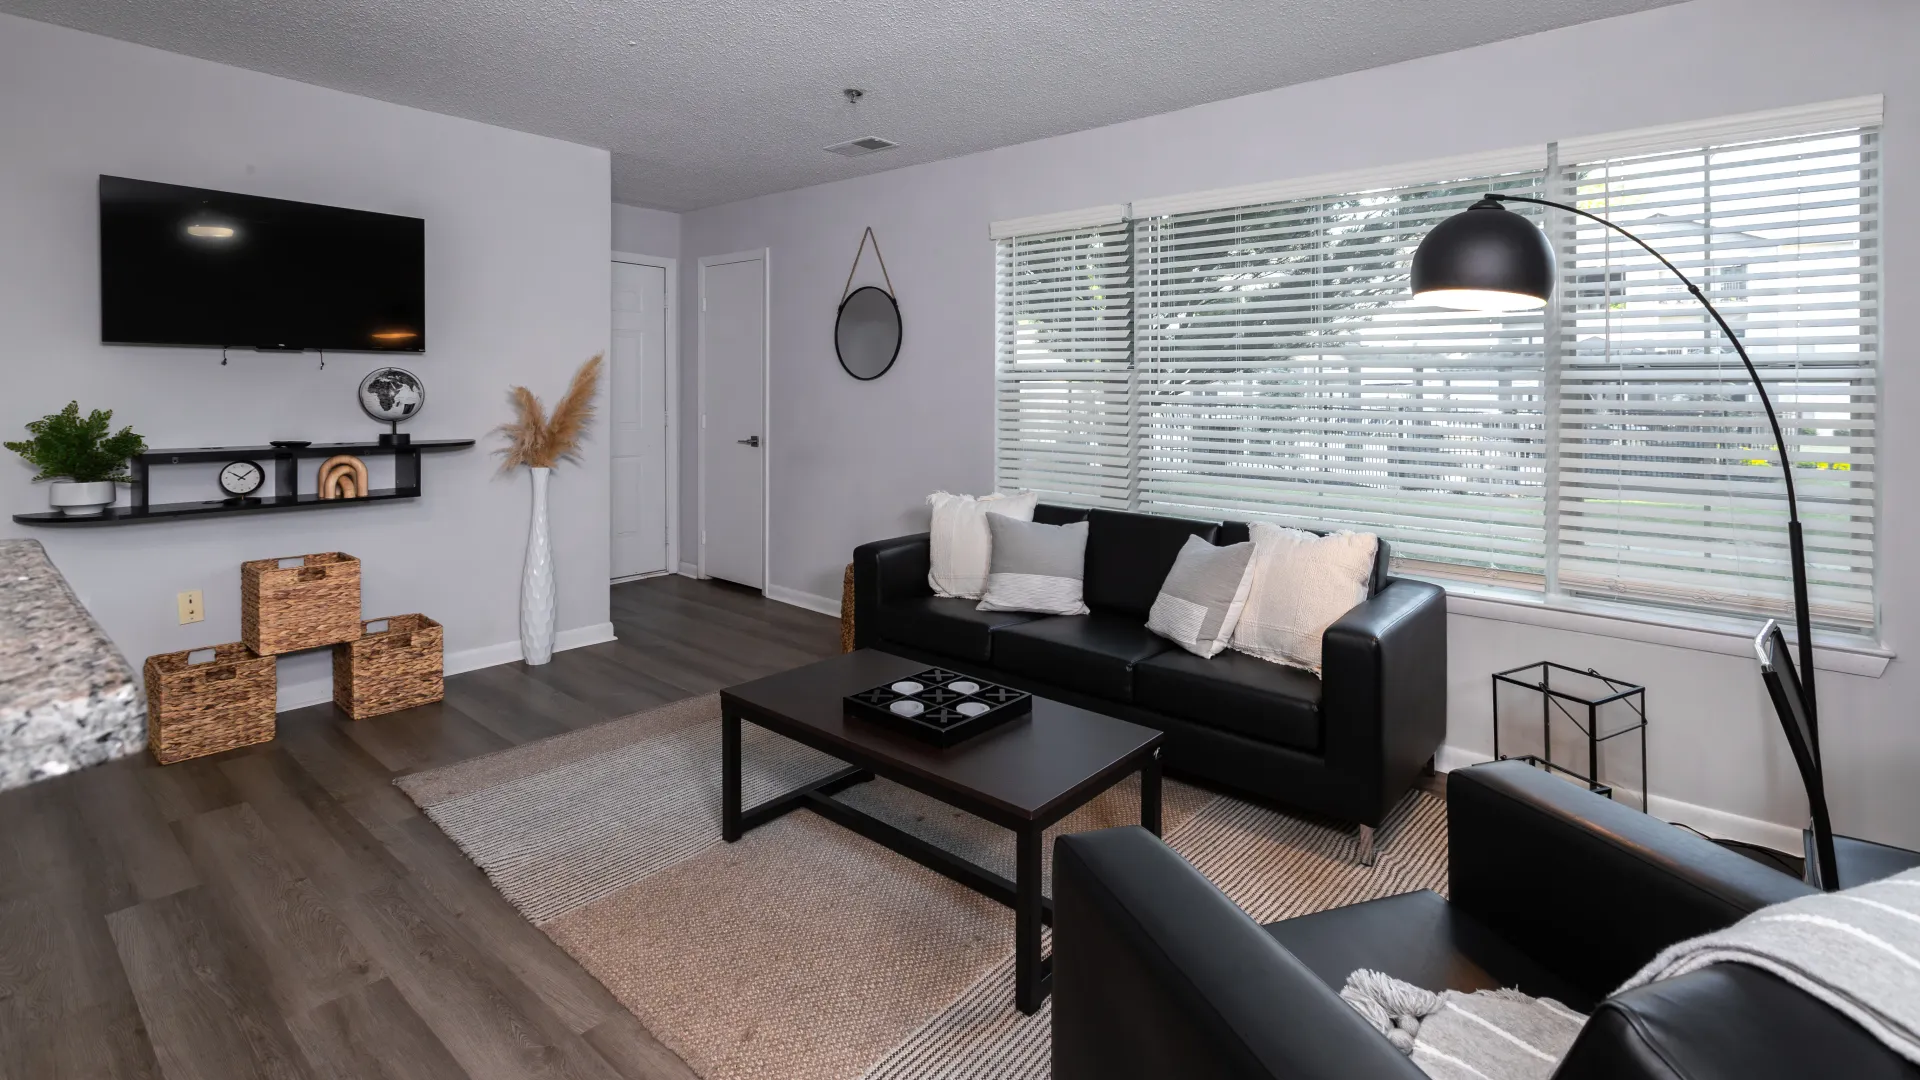 Bright living room with black leather seating, wall-mounted TV, coffee table, large windows with blinds, and stylish decor including wicker baskets and a floor lamp.